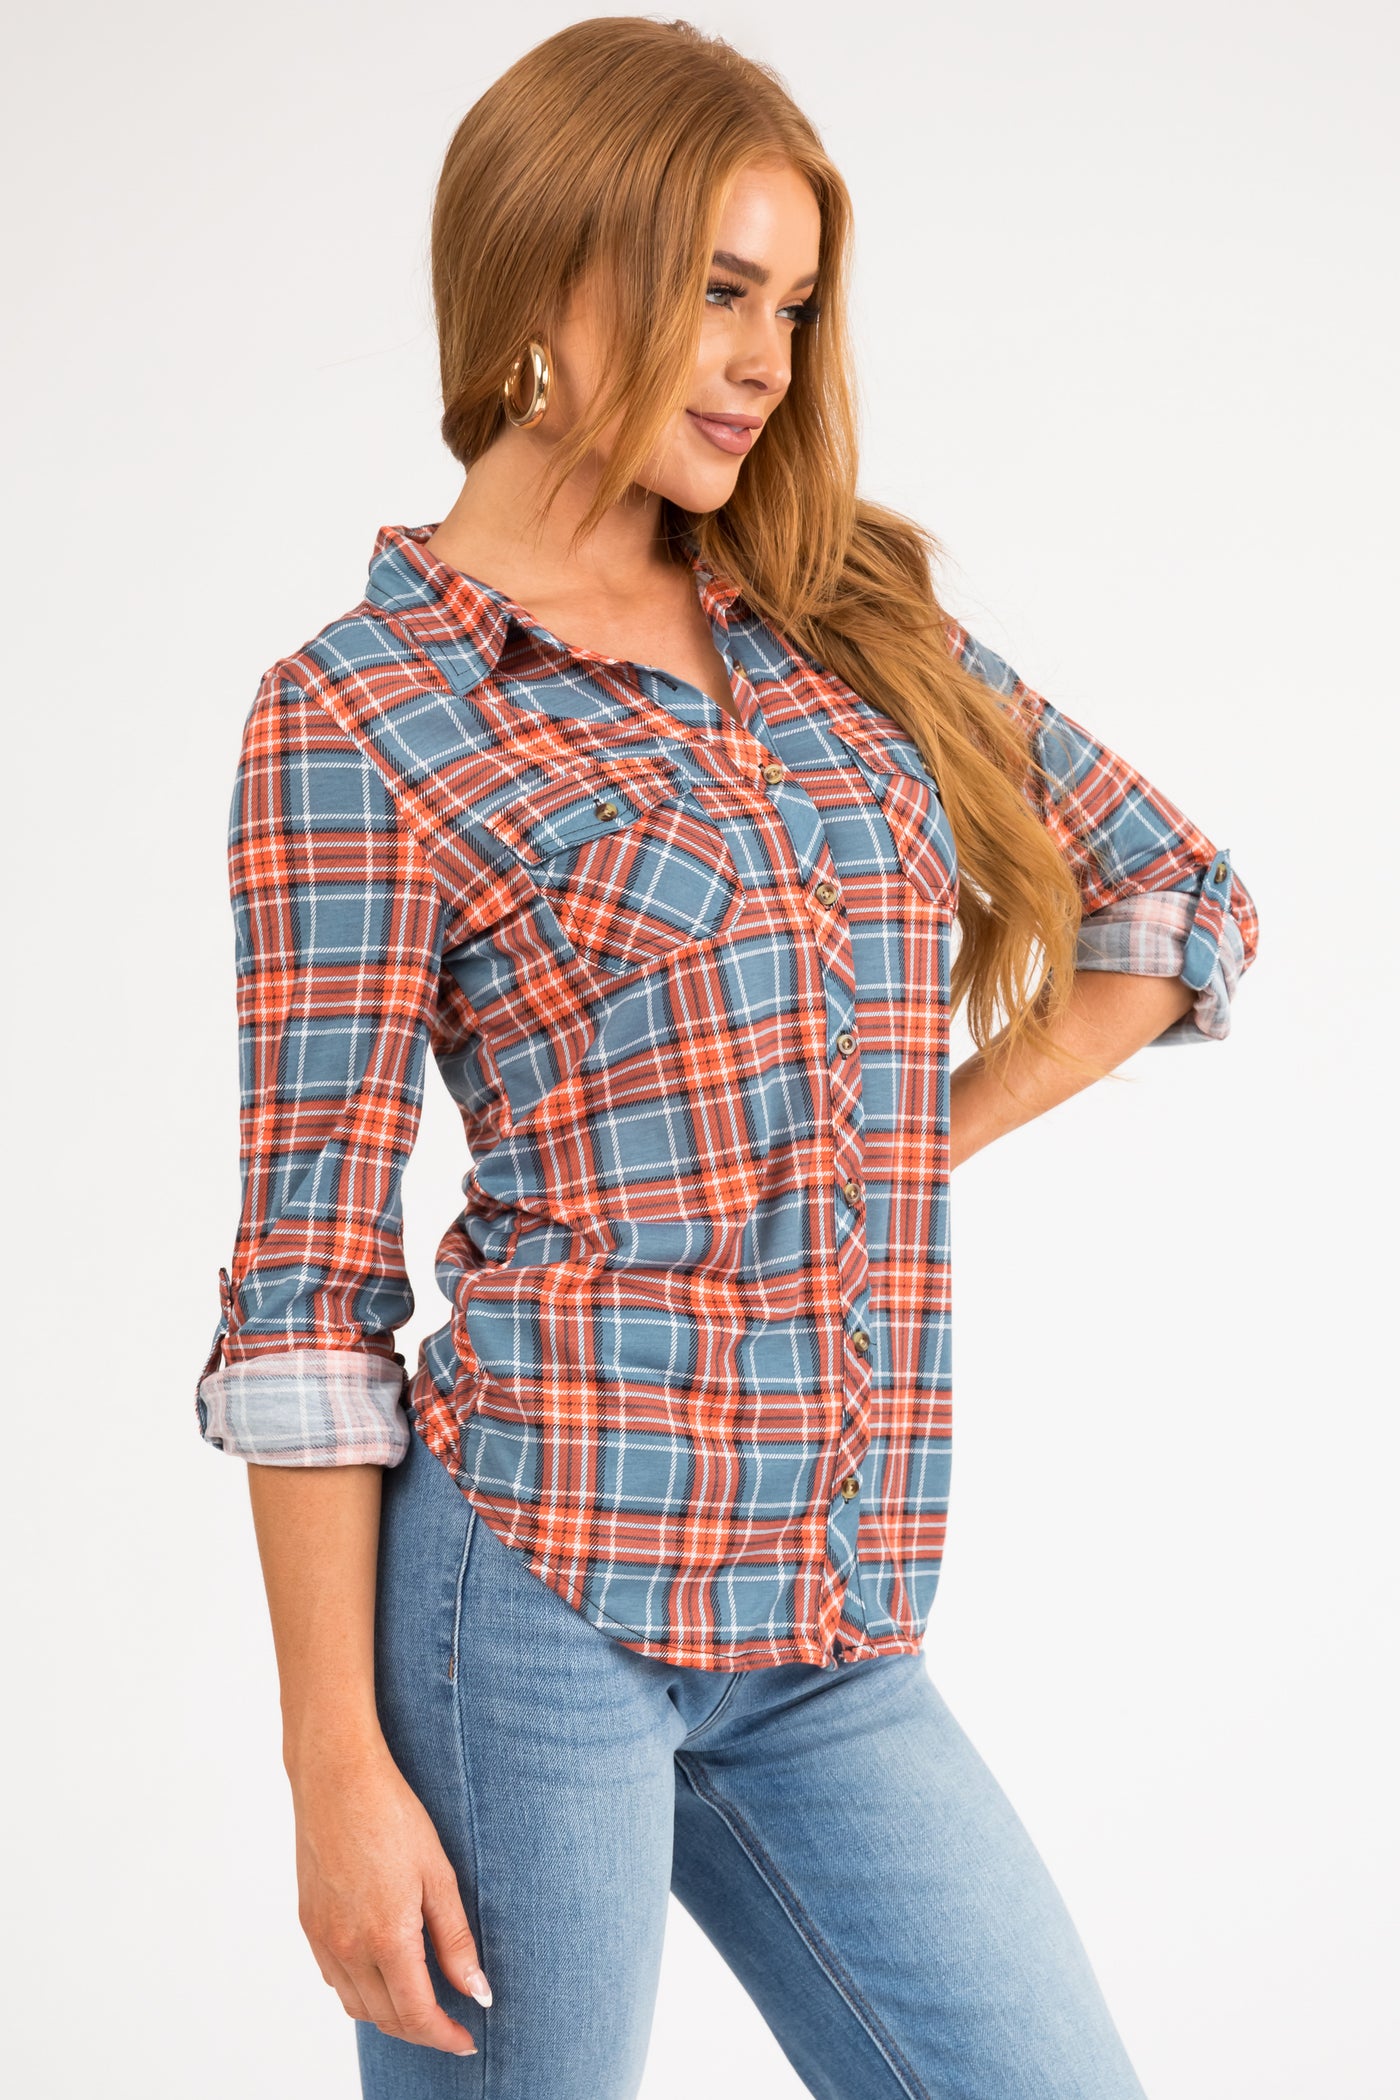 Slate and Pumpkin Plaid Top with Chest Pocket